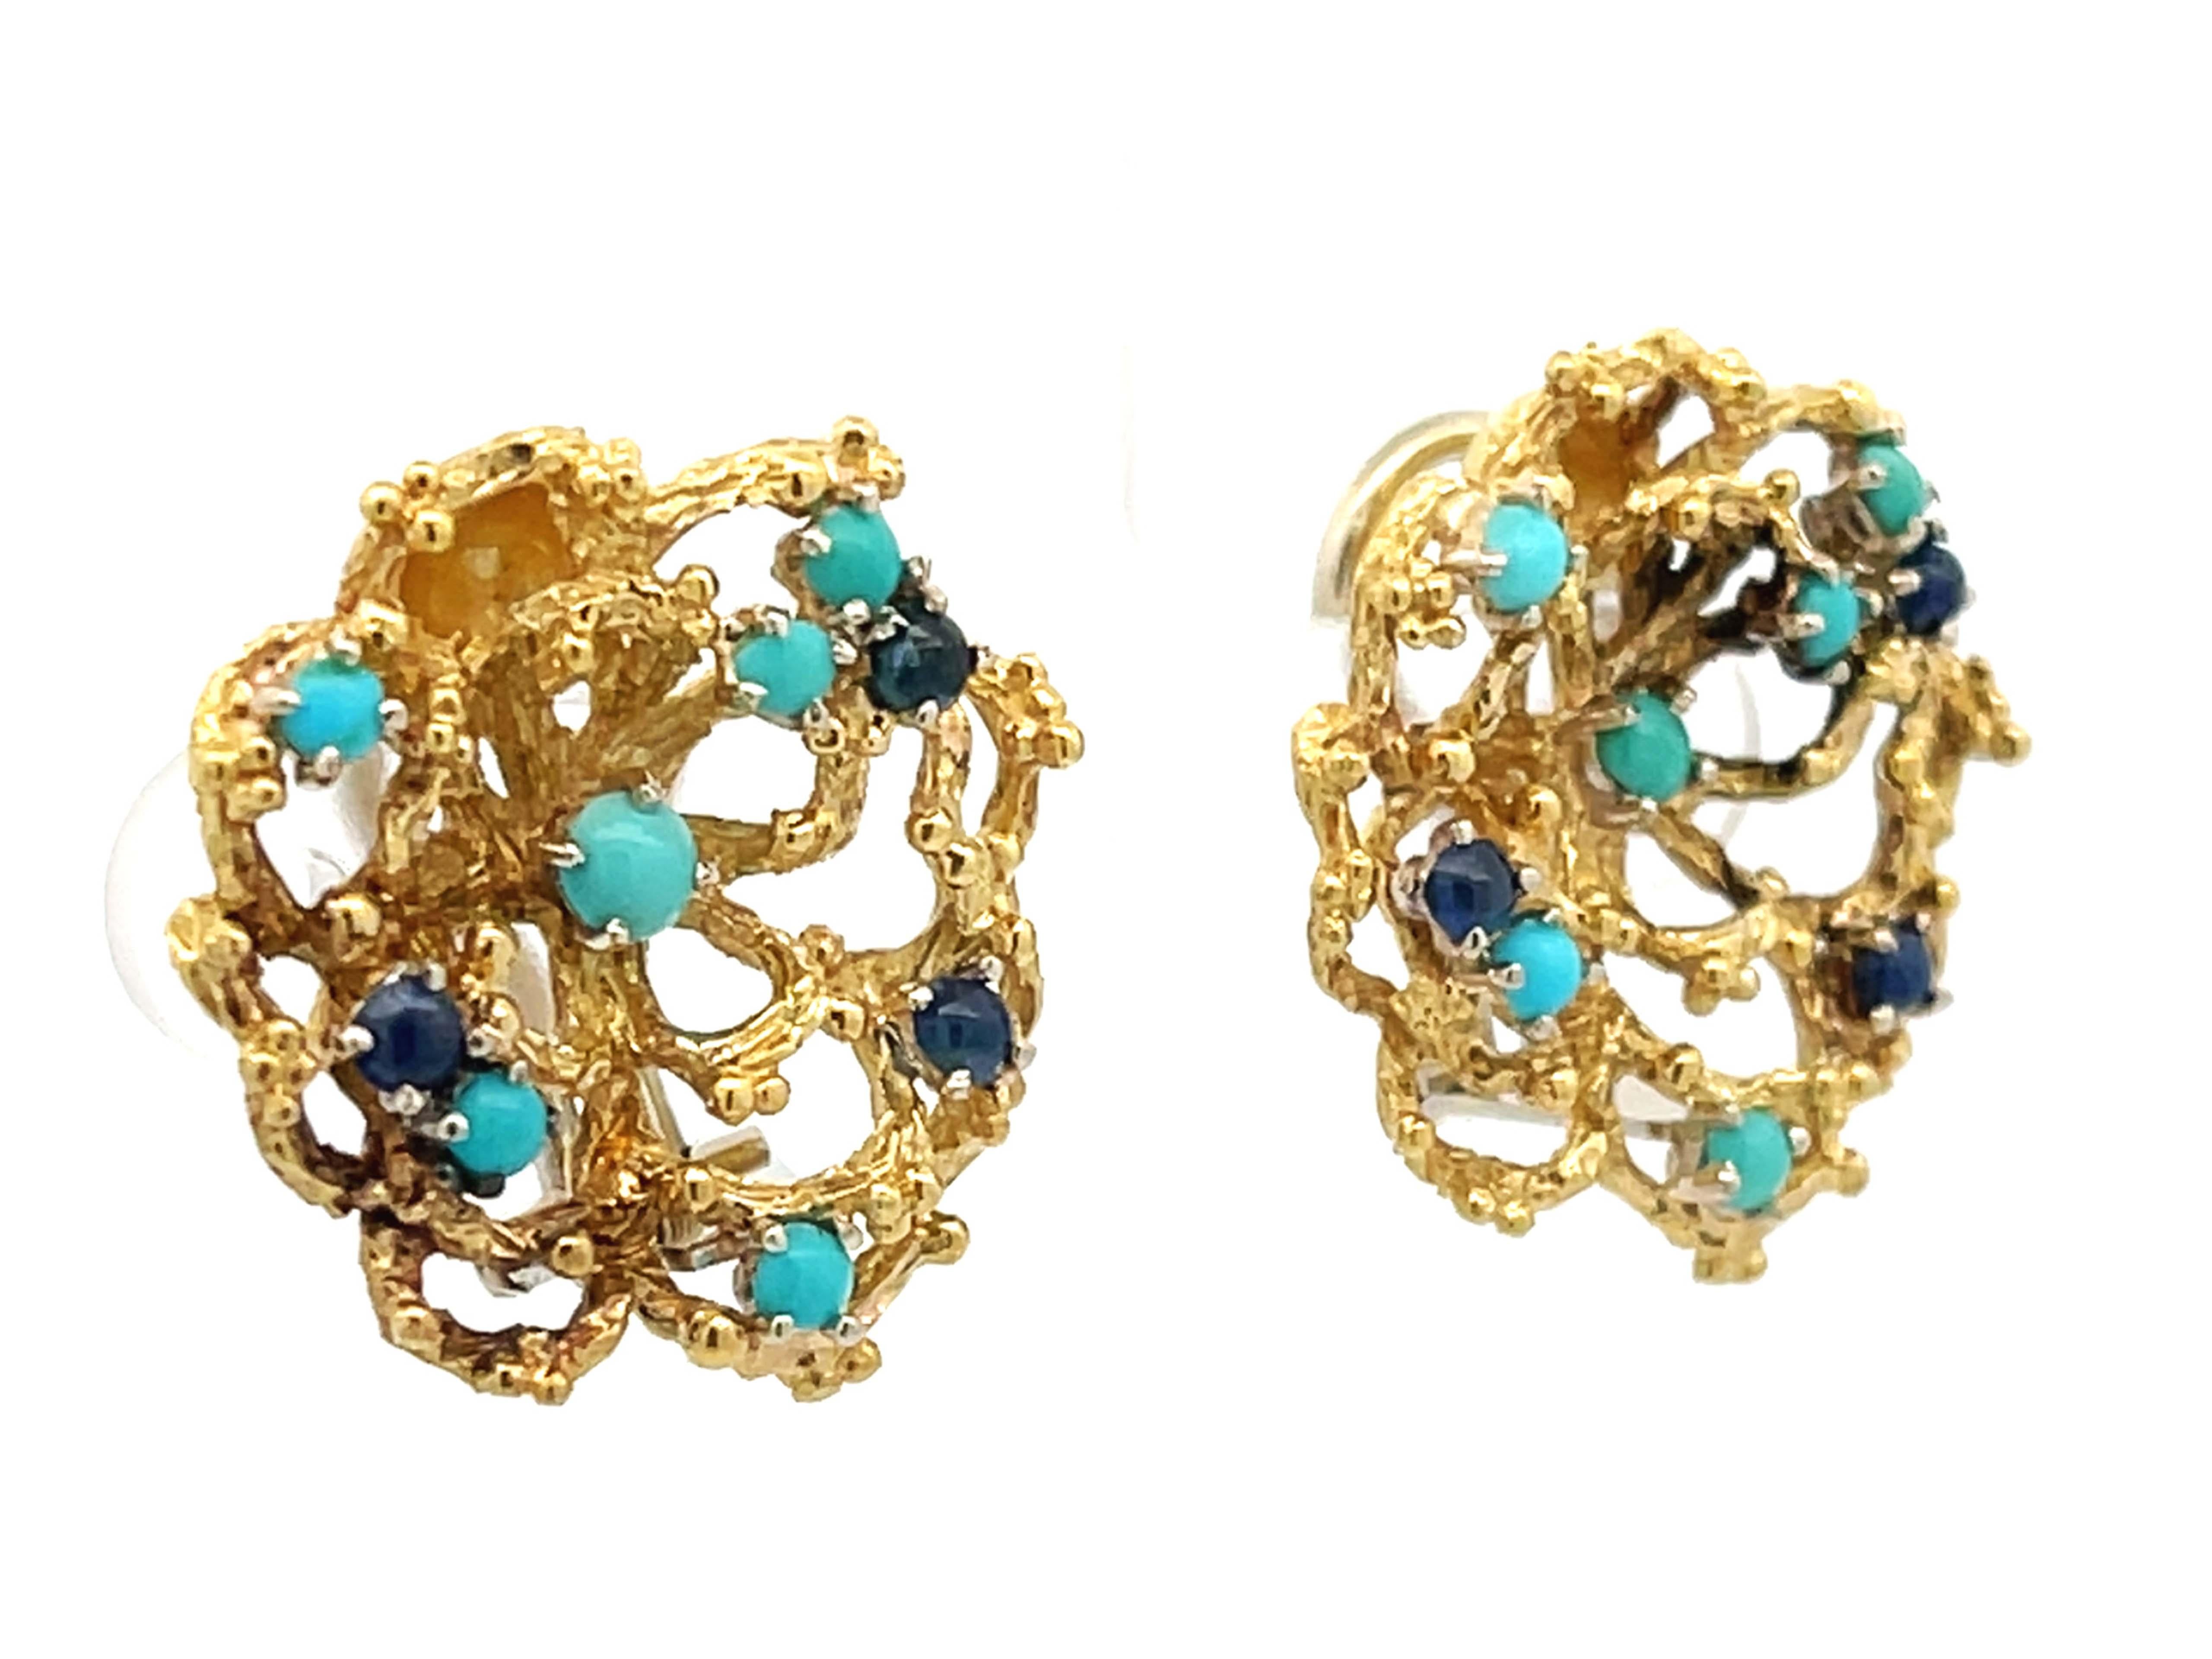 Modern Wavy Flower Earrings with Cabochon Sapphires and Turquoises in 18k Yellow Gold For Sale